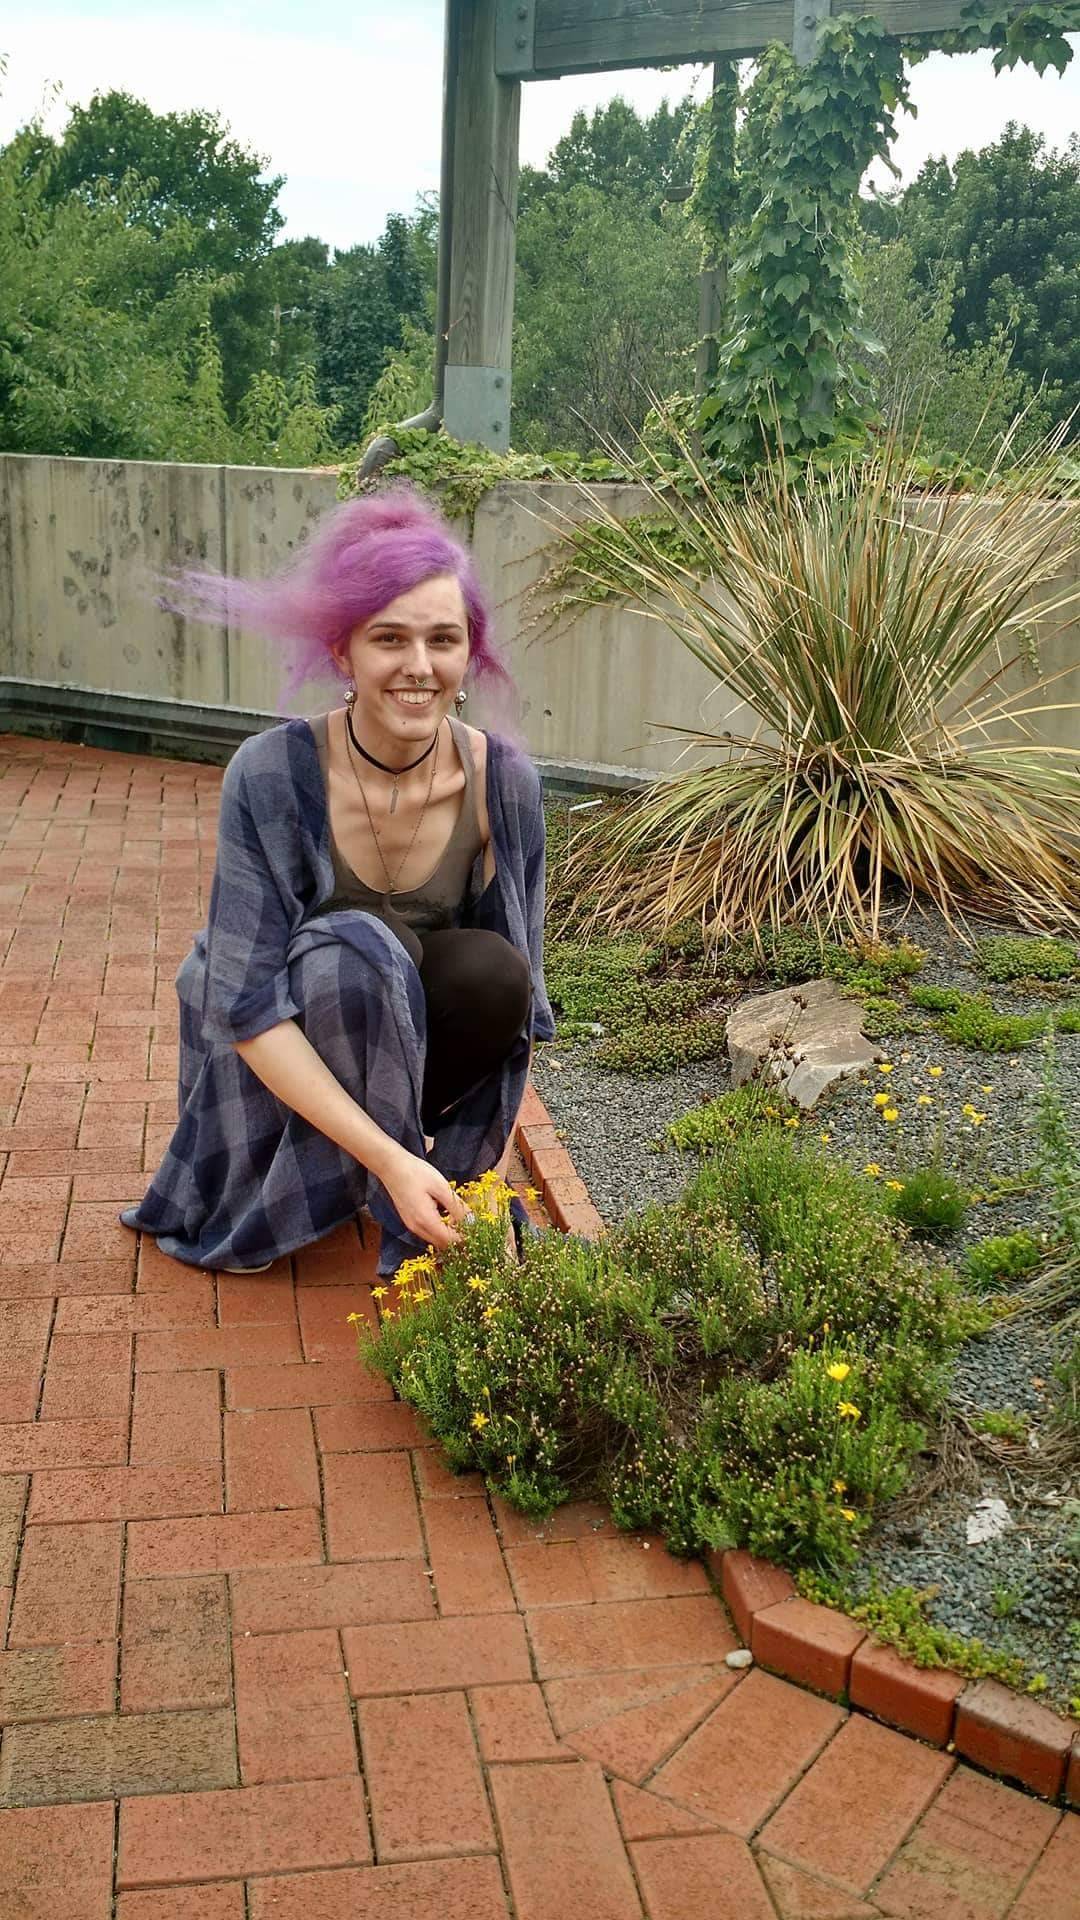 trans-witch-lexi: I was being all plant-witchy yesterday!   I went to an arboretum